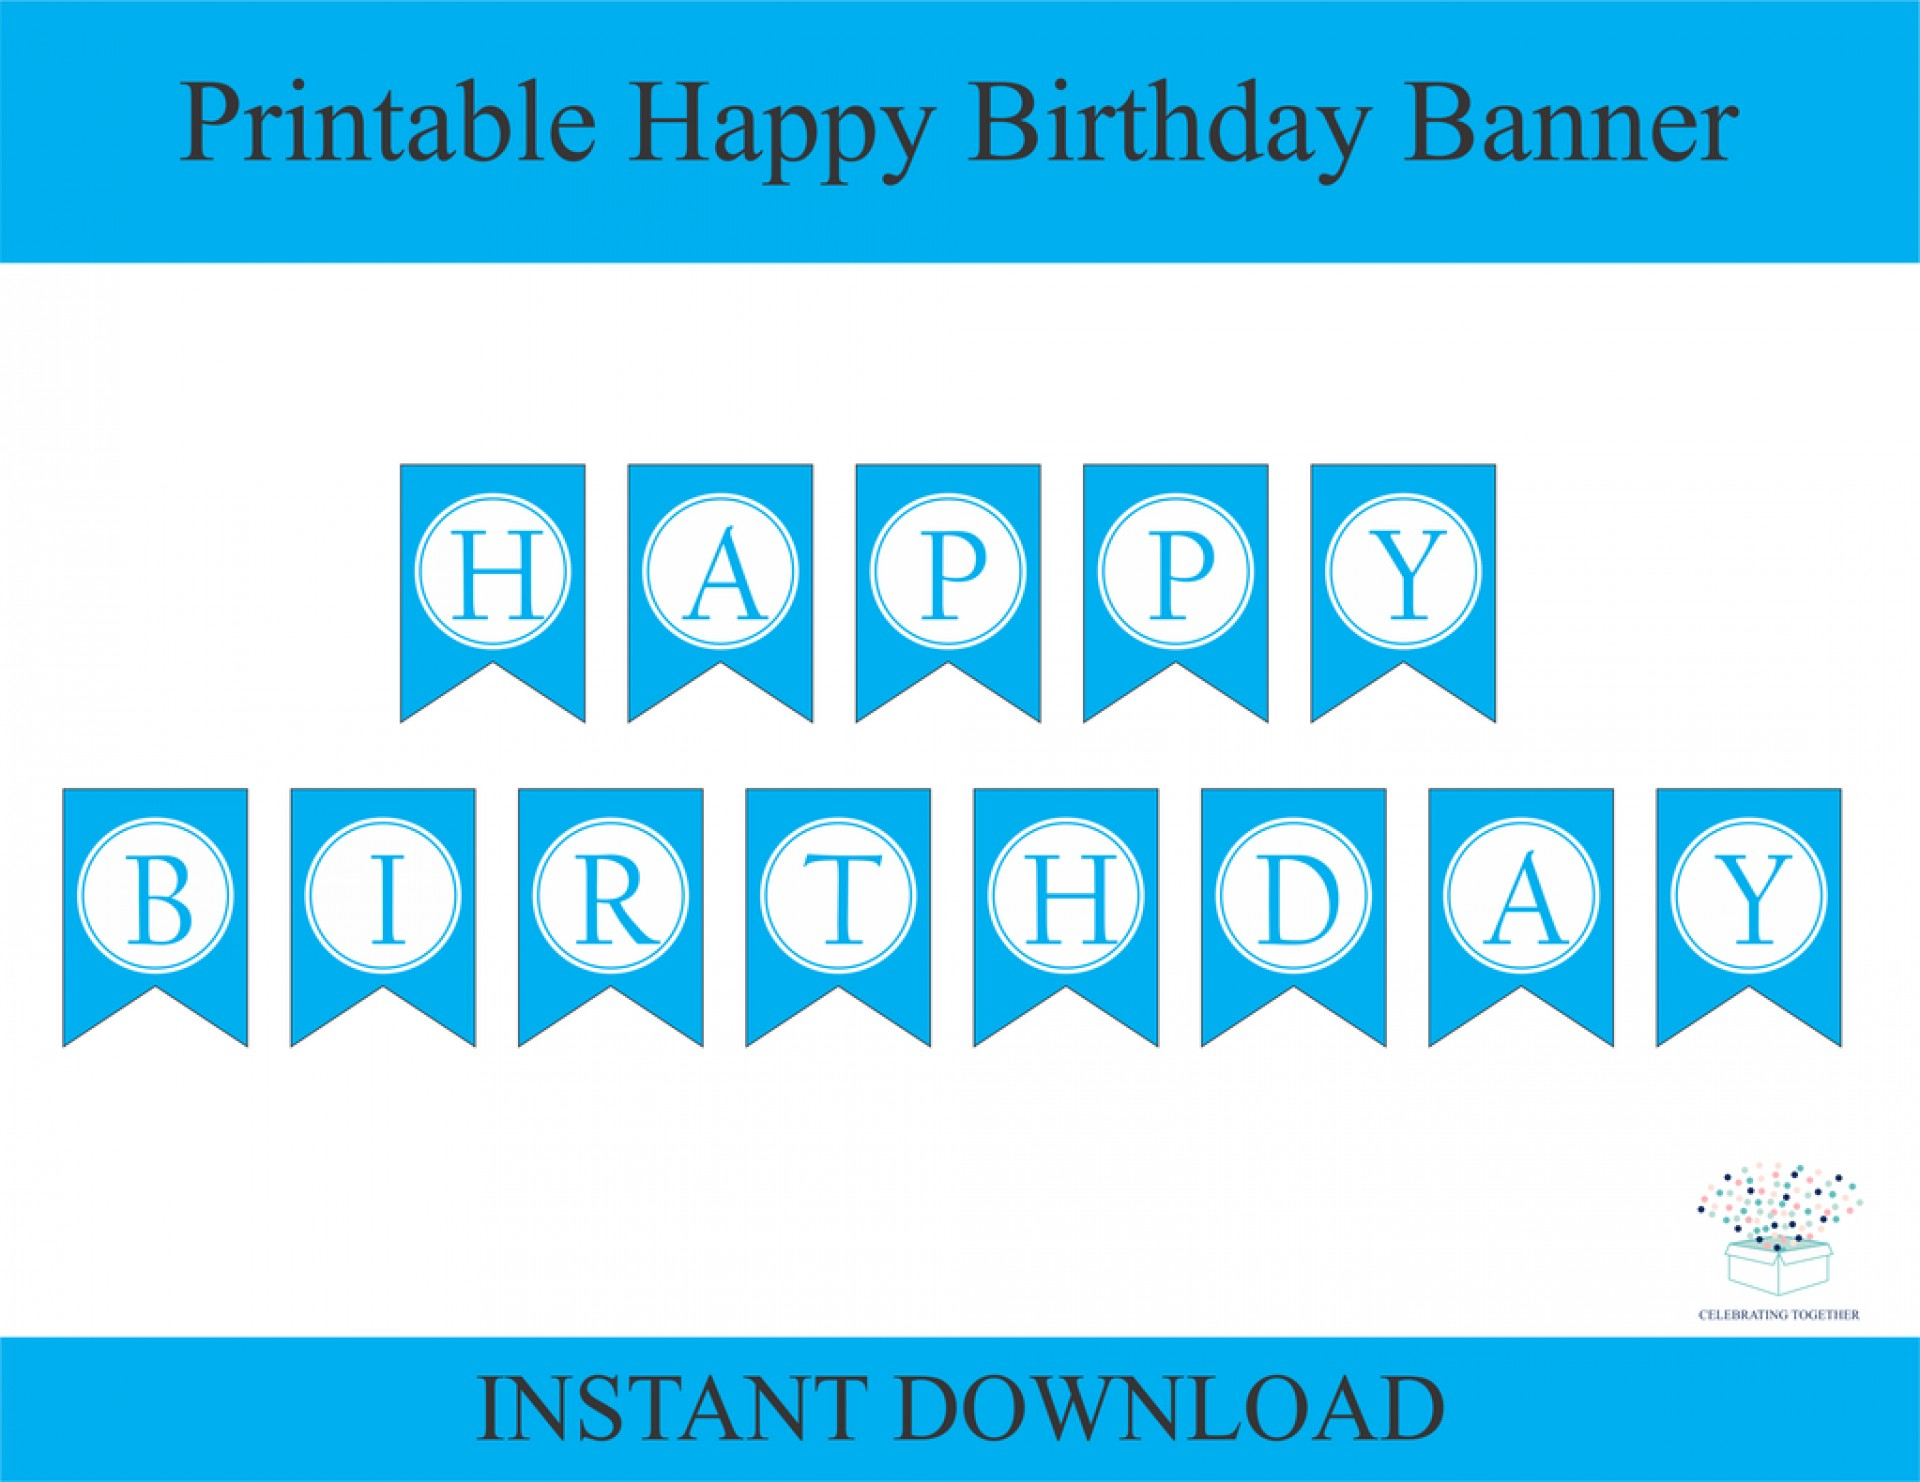 Feb Diy Birthday Banner Template | Wiring Resources With Diy Party Banner Template